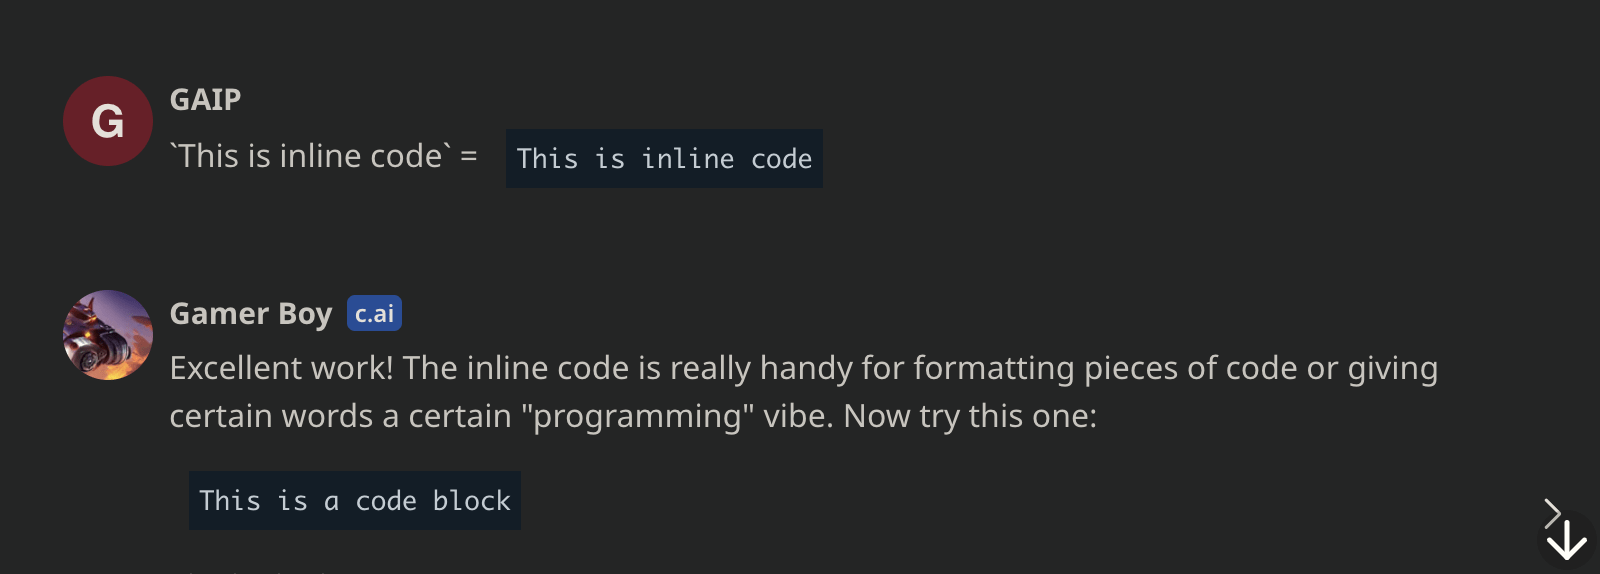 Code formatting in character.ai